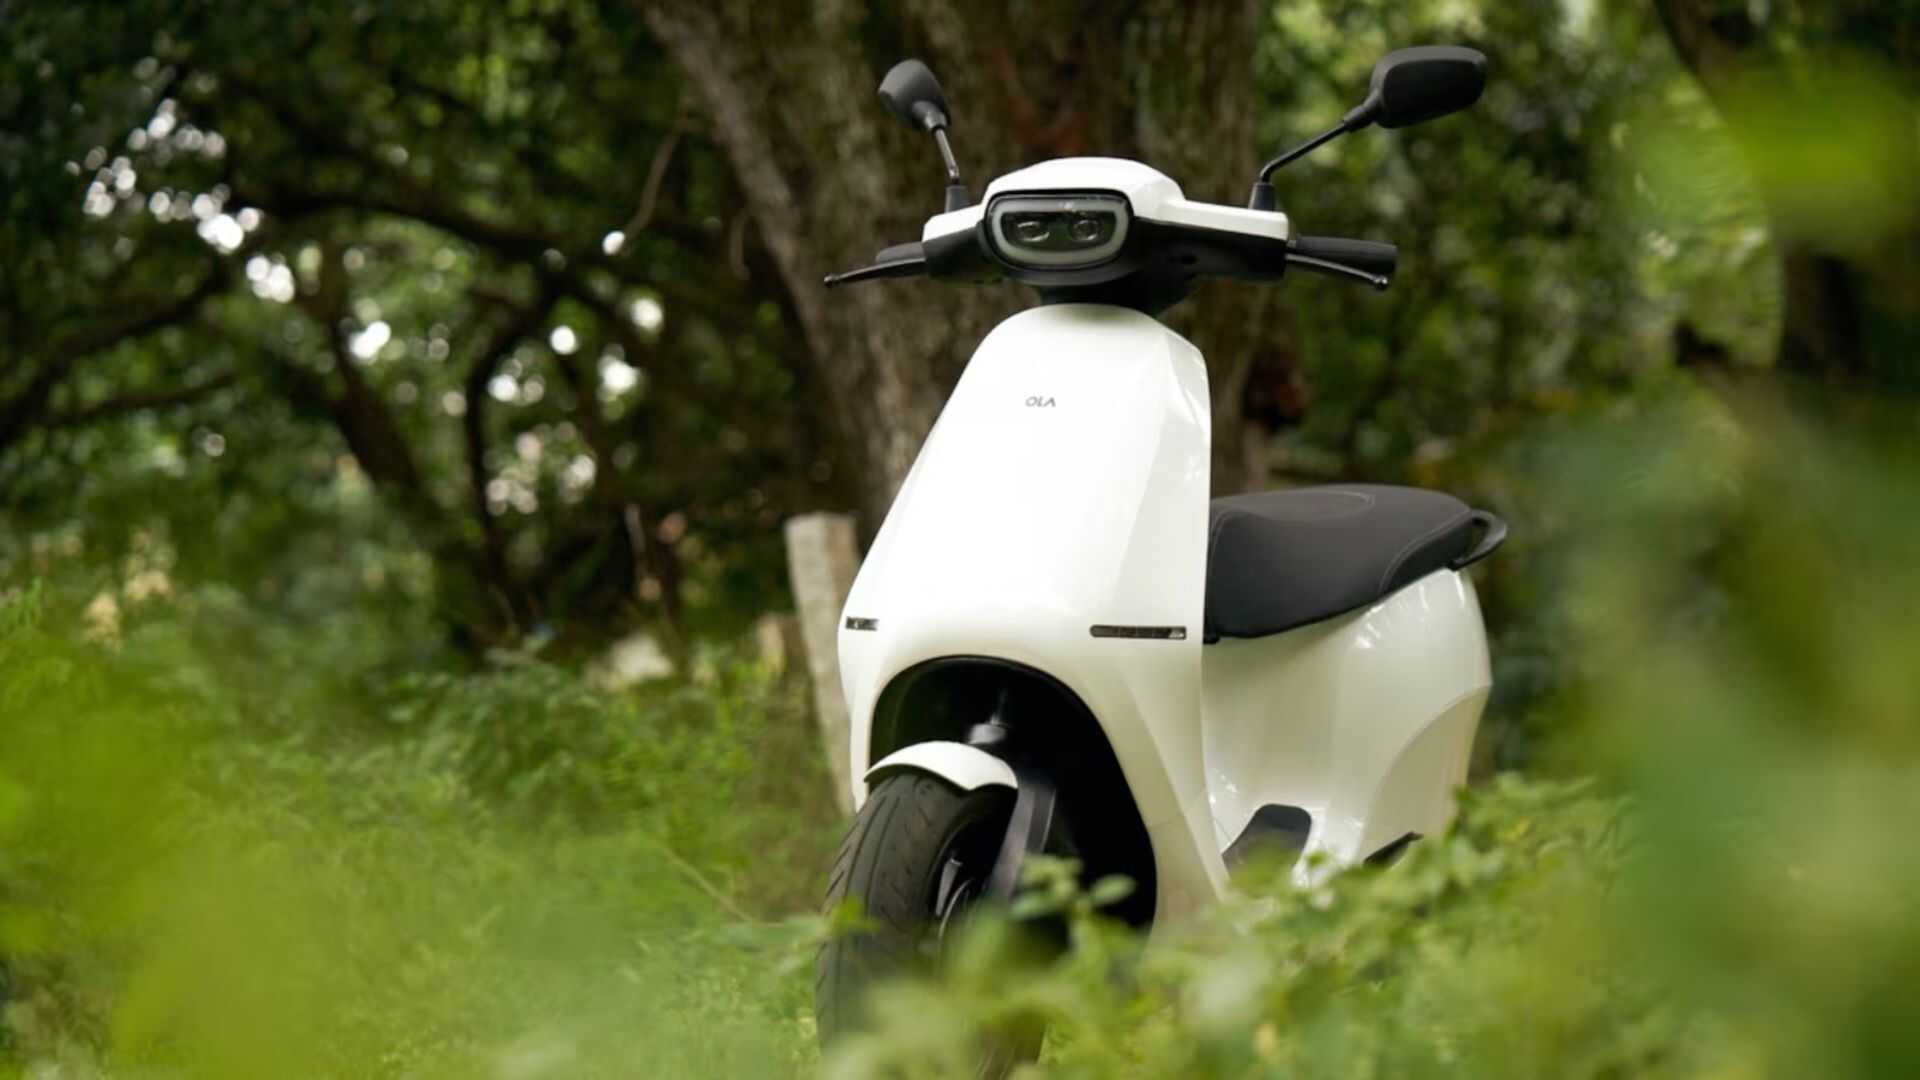 Ola Electric Fined Rs 1.94 Lakh for Delivering Defective Scooter